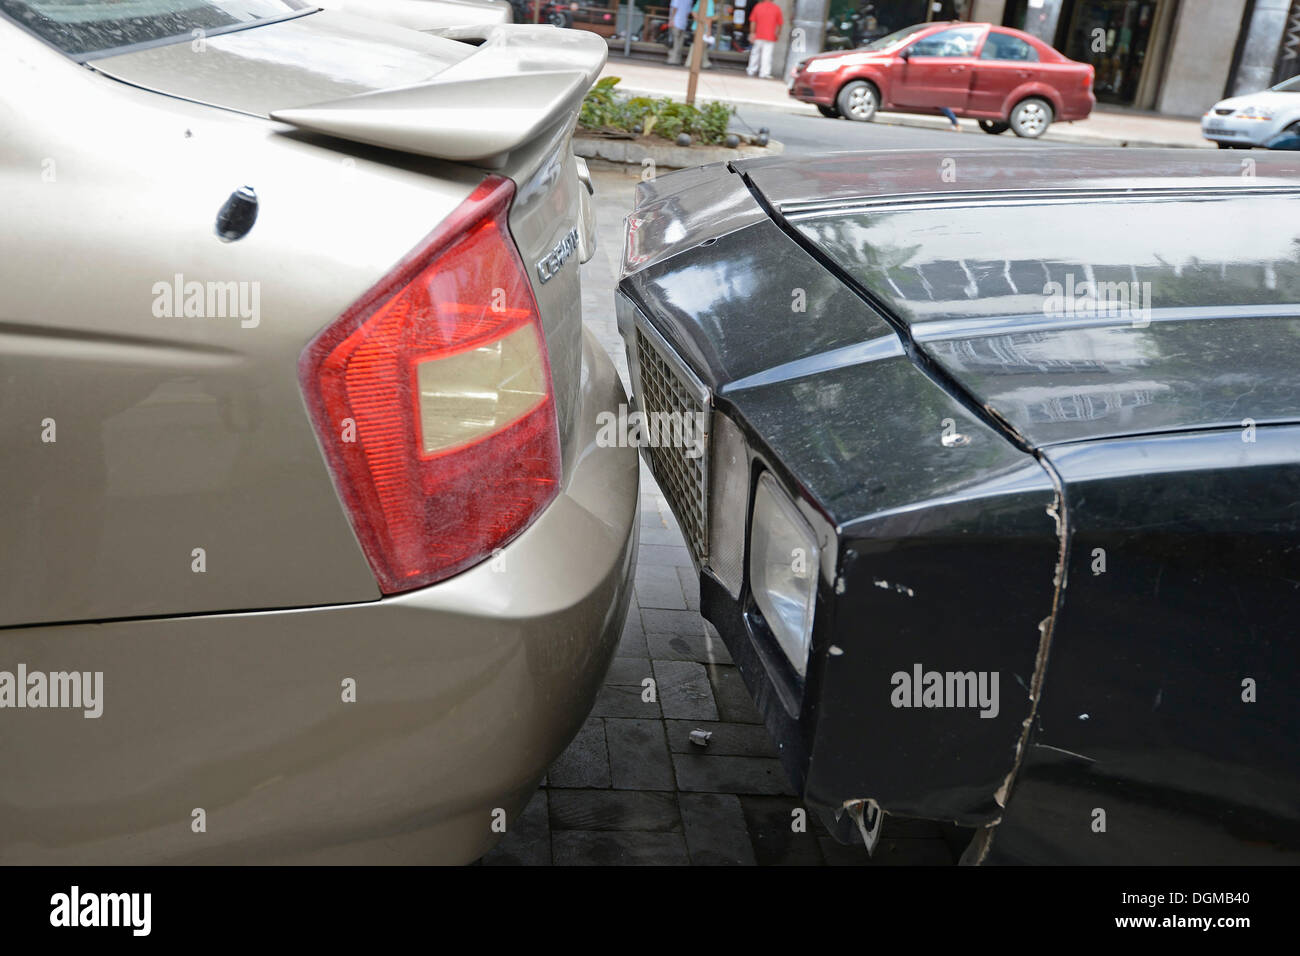 Cars parked bumper to bumper, usual parking in the old town of Guayaquil, Ecuador, South America Stock Photo